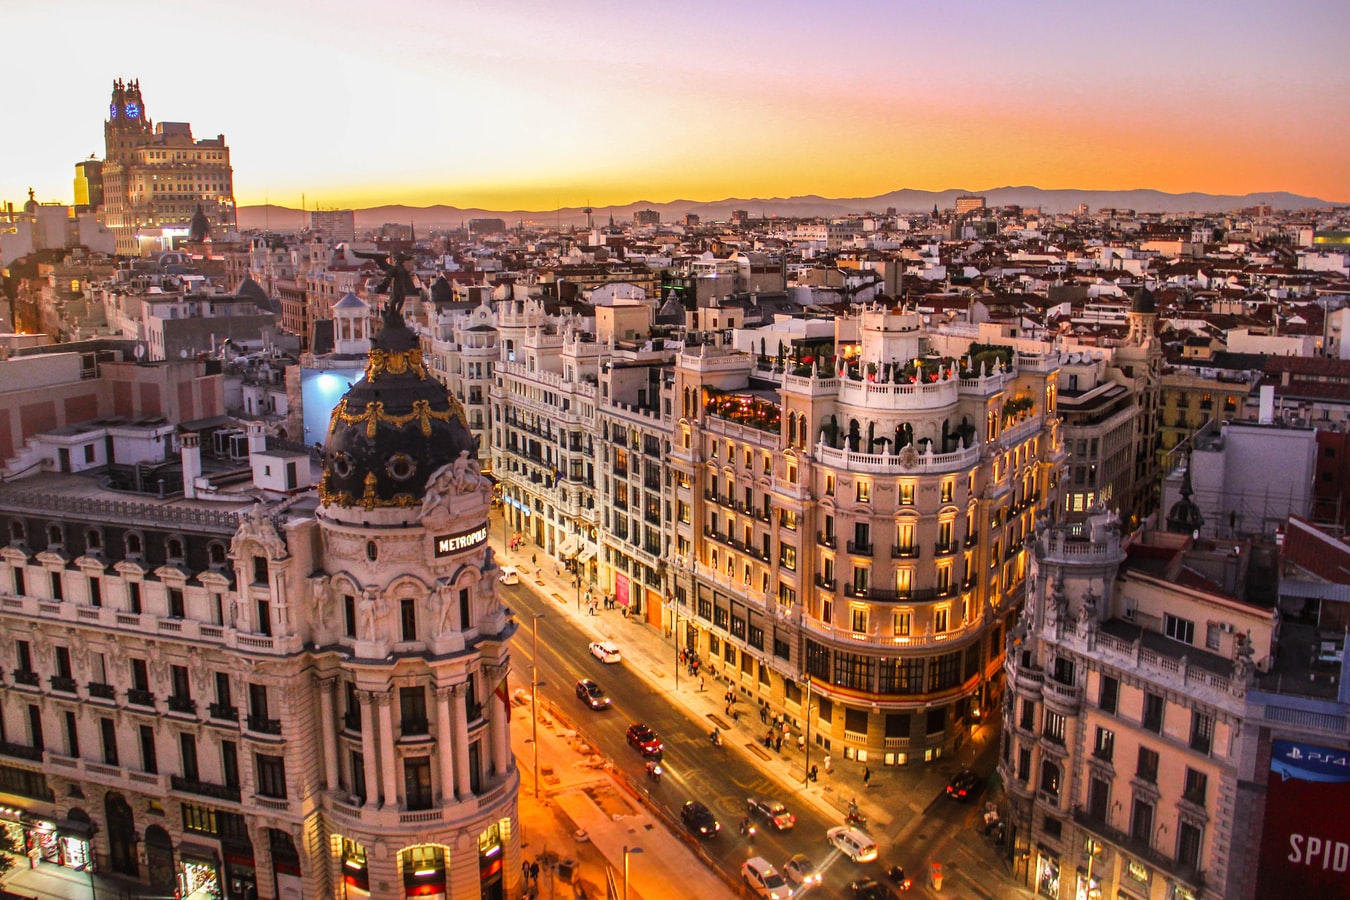 Sunset view of Gran Via in Madrid (Photo: Florian Wehde)